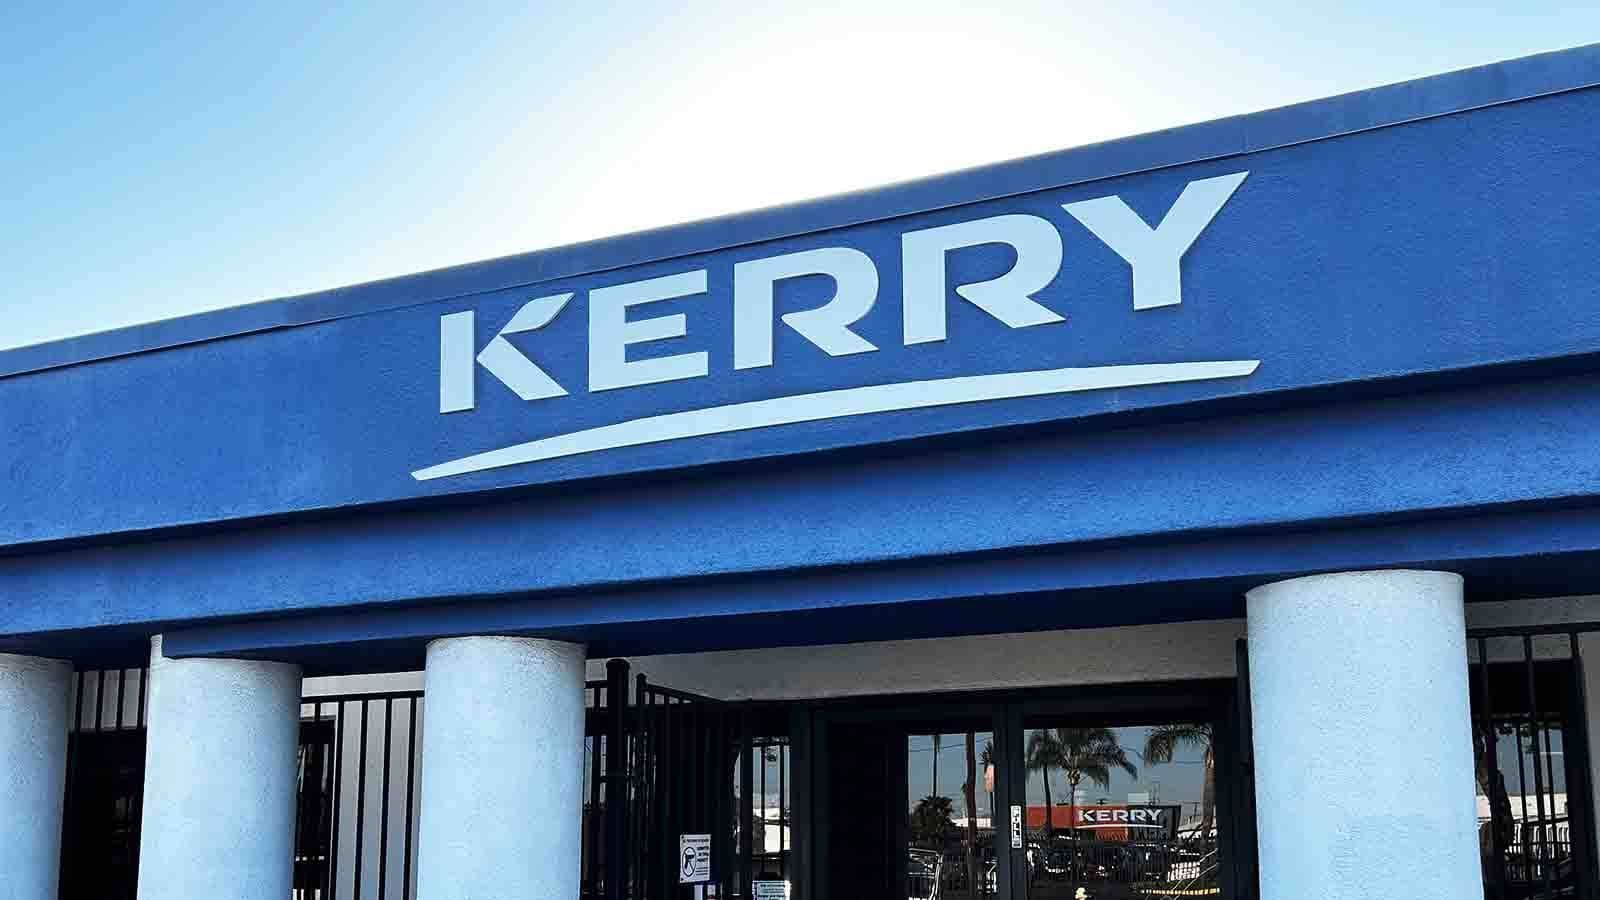 Kerry PVC sign mounted on the facade